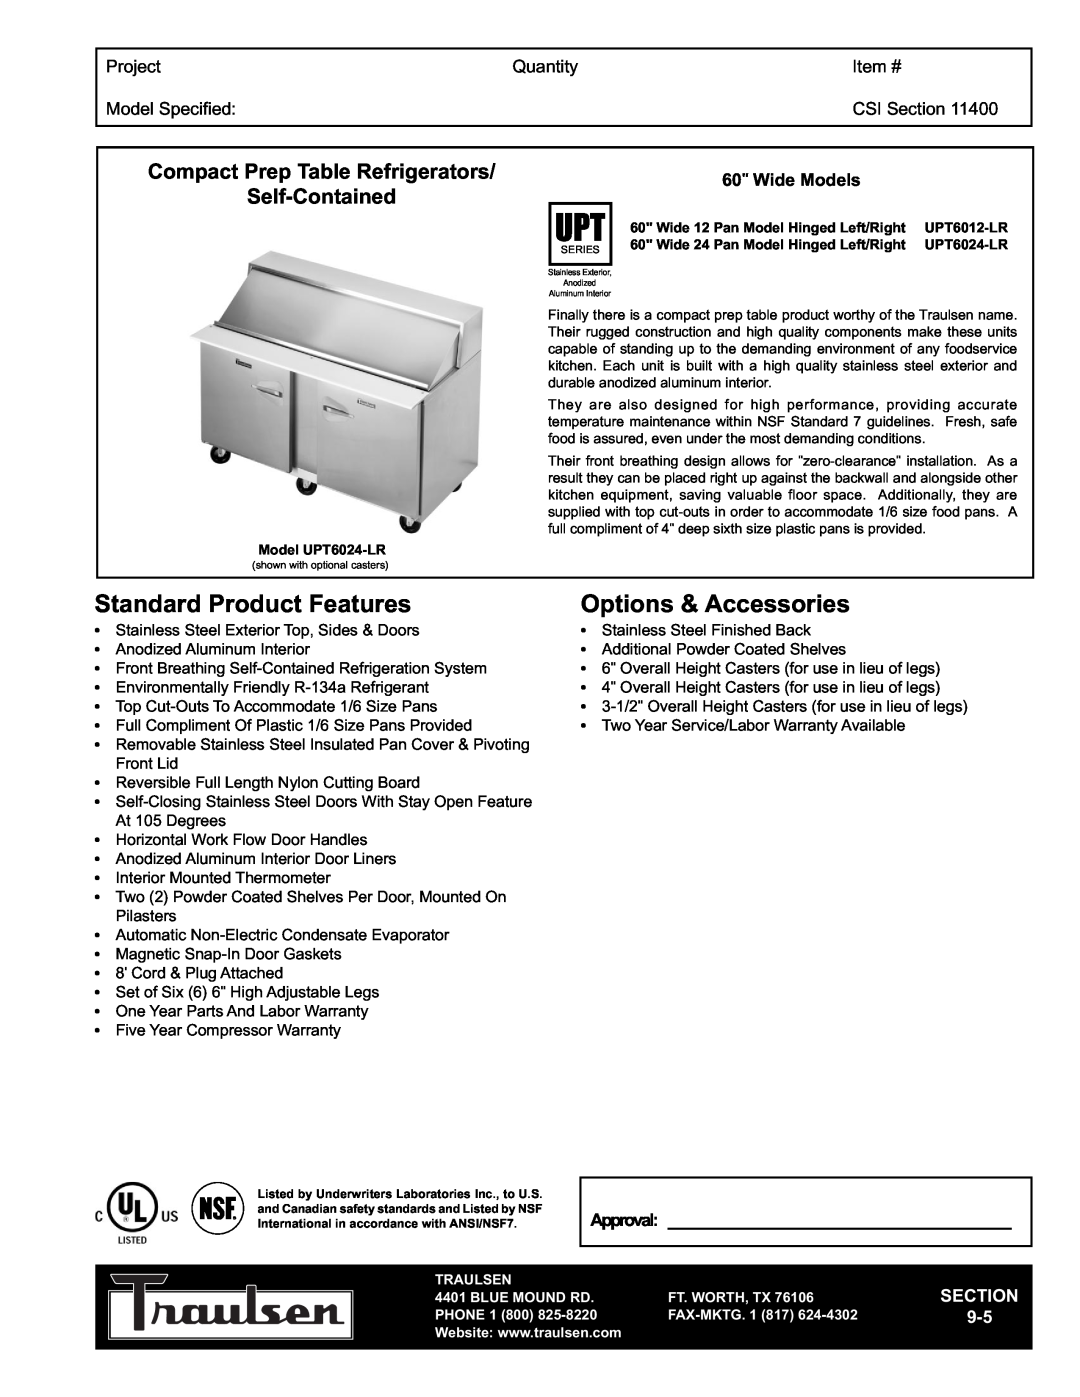 Traulsen UPT6024-LR warranty Compact Prep Table Refrigerators Self-Contained, Project, Quantity, Item #, Model Specified 